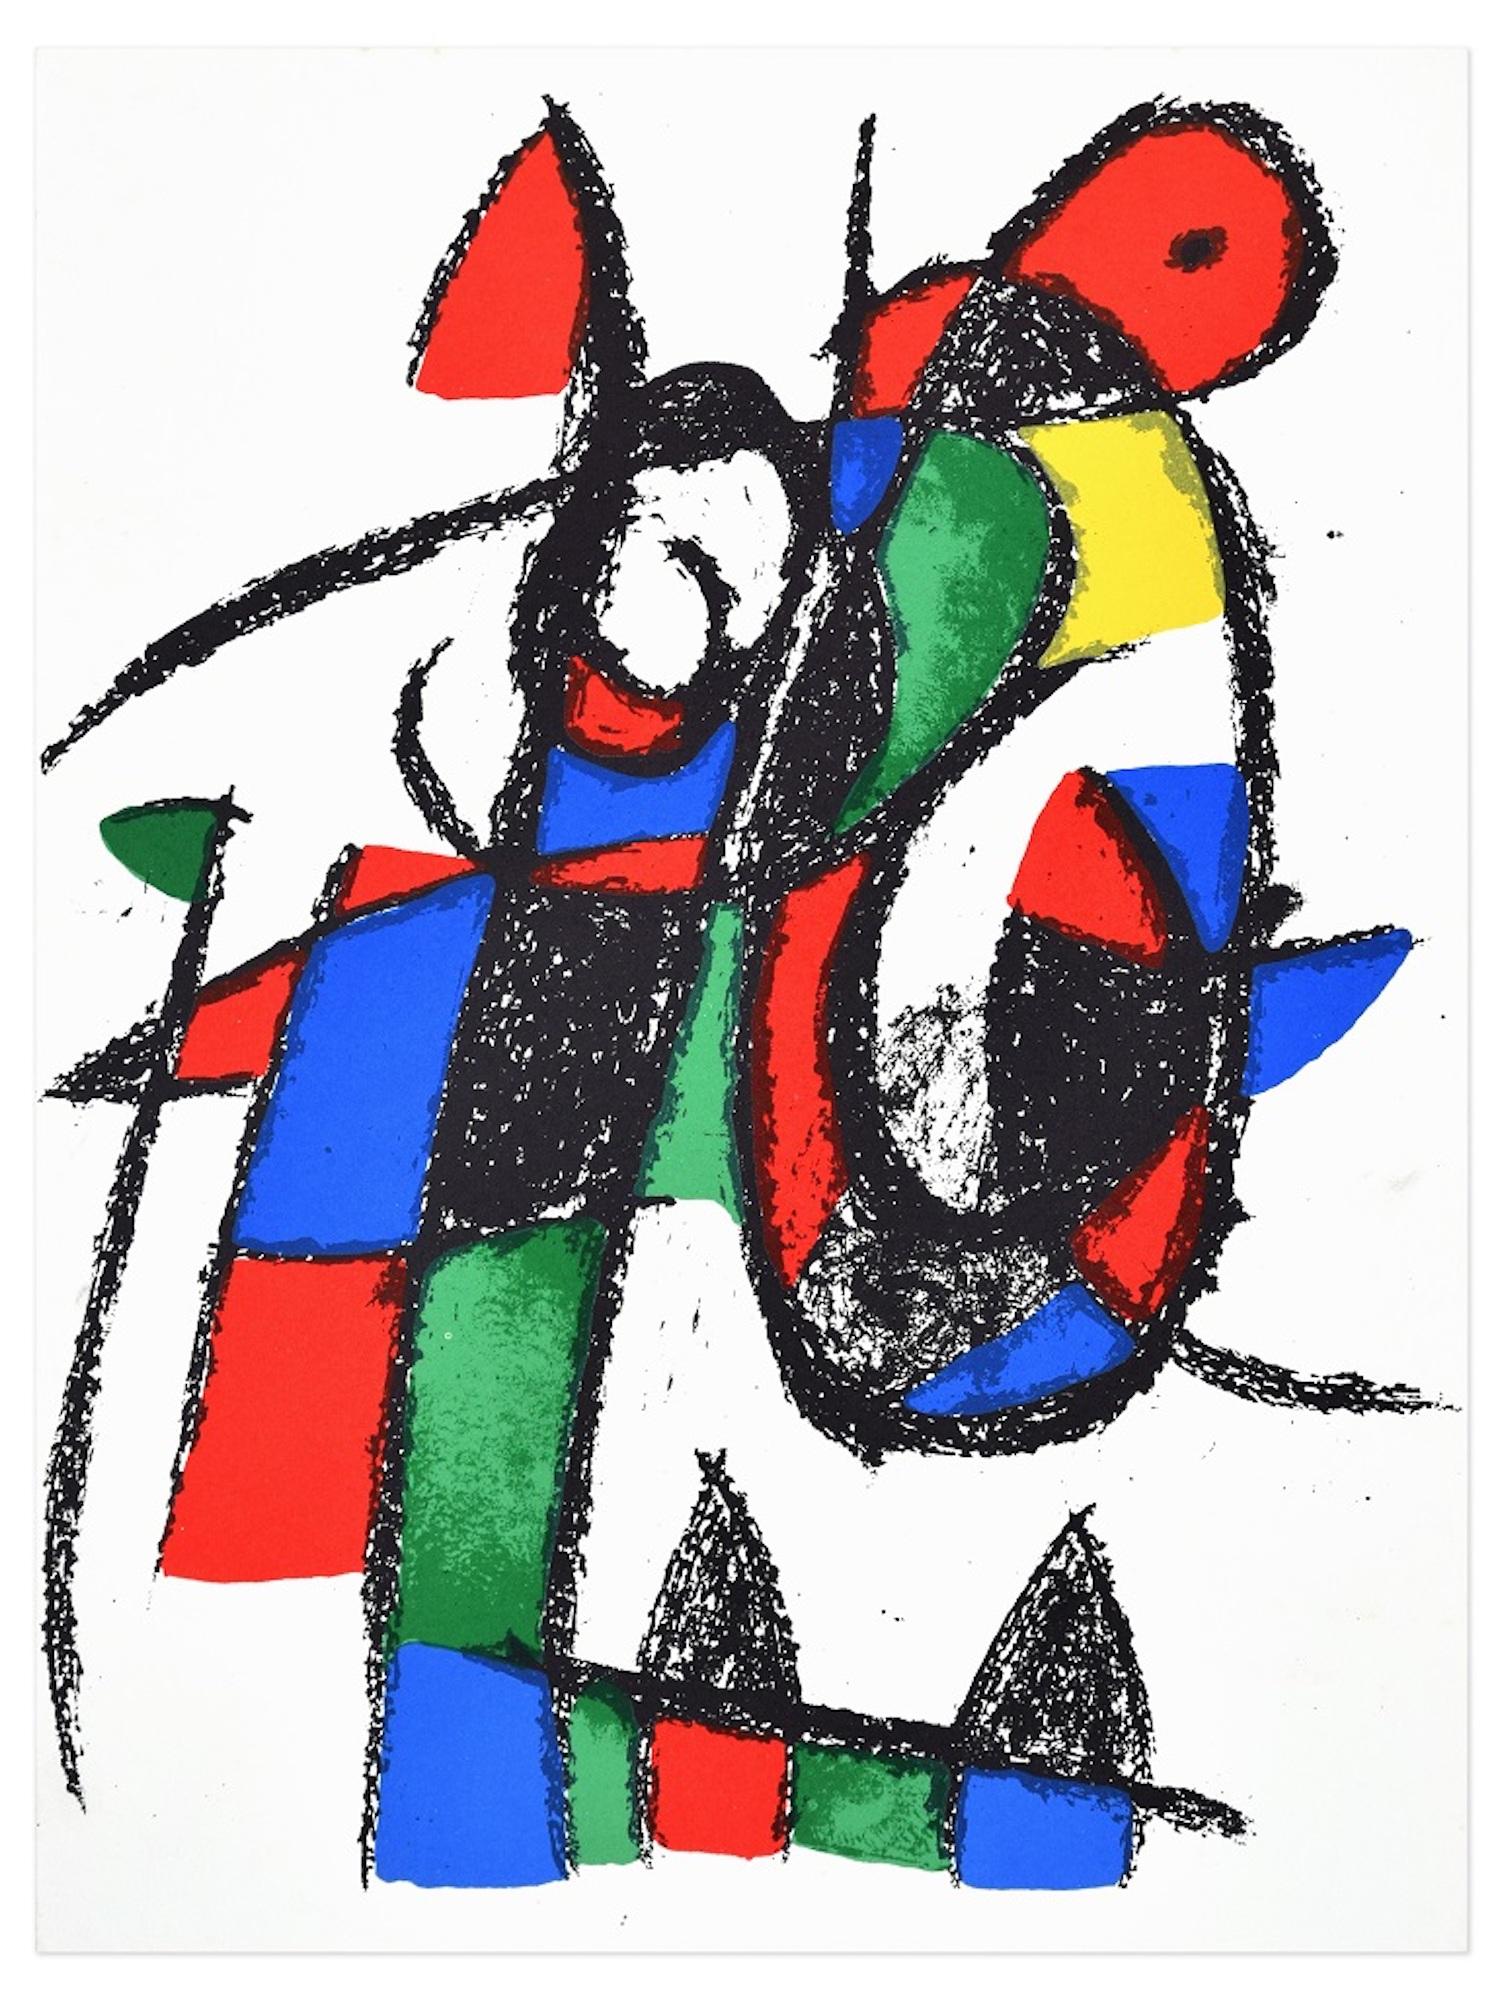 (after) Joan Miró Abstract Print - Composition II - Original Lithograph by Joan Mirò - 1974